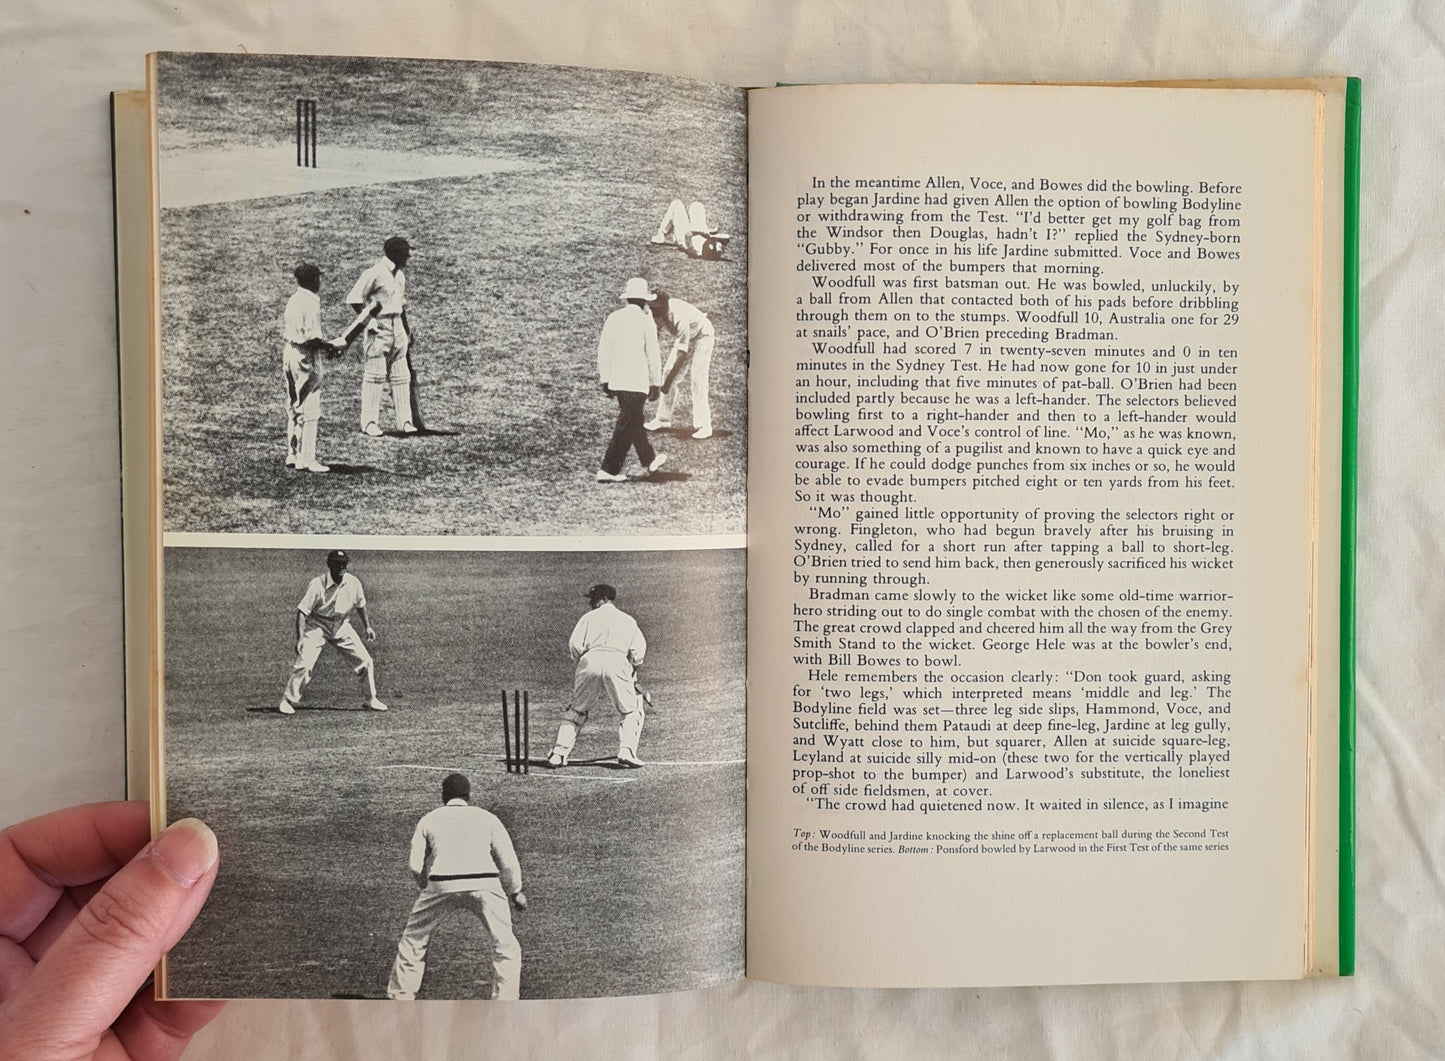 Bodyline Umpire by R. S. Whitington and George Hele